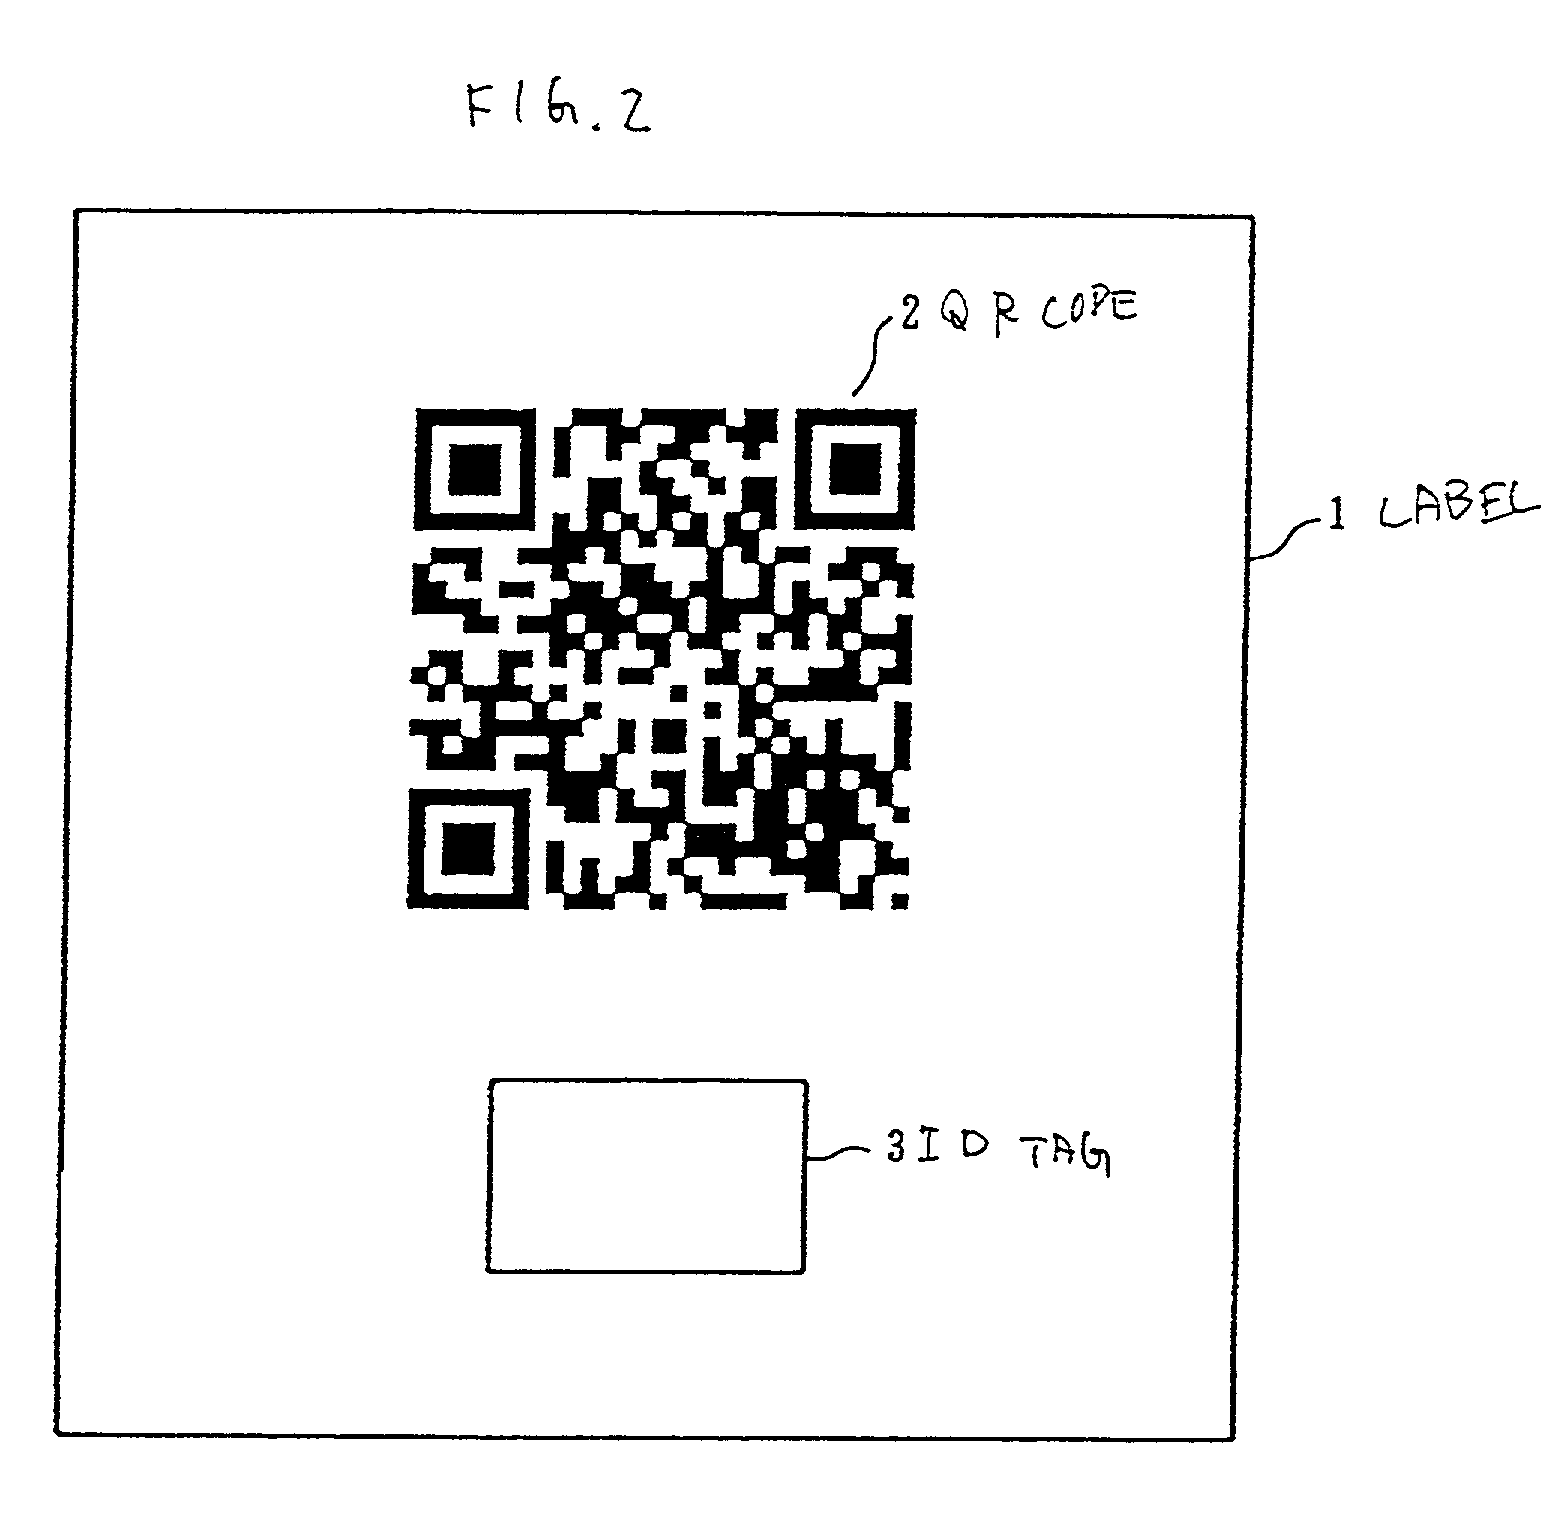 Data, code label, a method of decoding data codes, and an optical data code decoding system